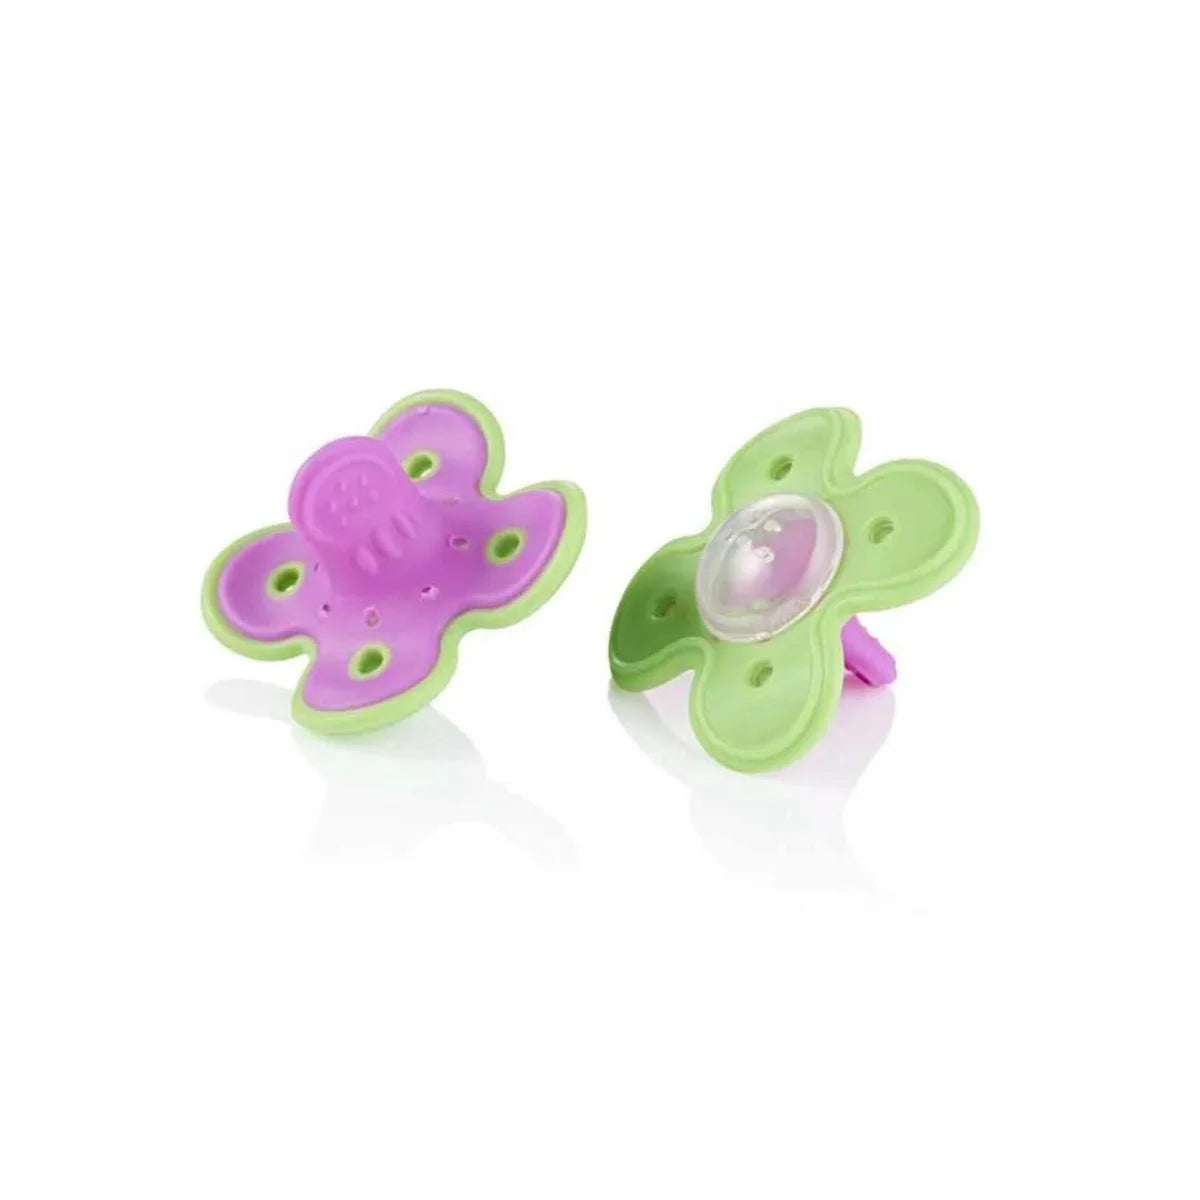 pink and green 2 pack of molar munch baby teethers for teething symptoms